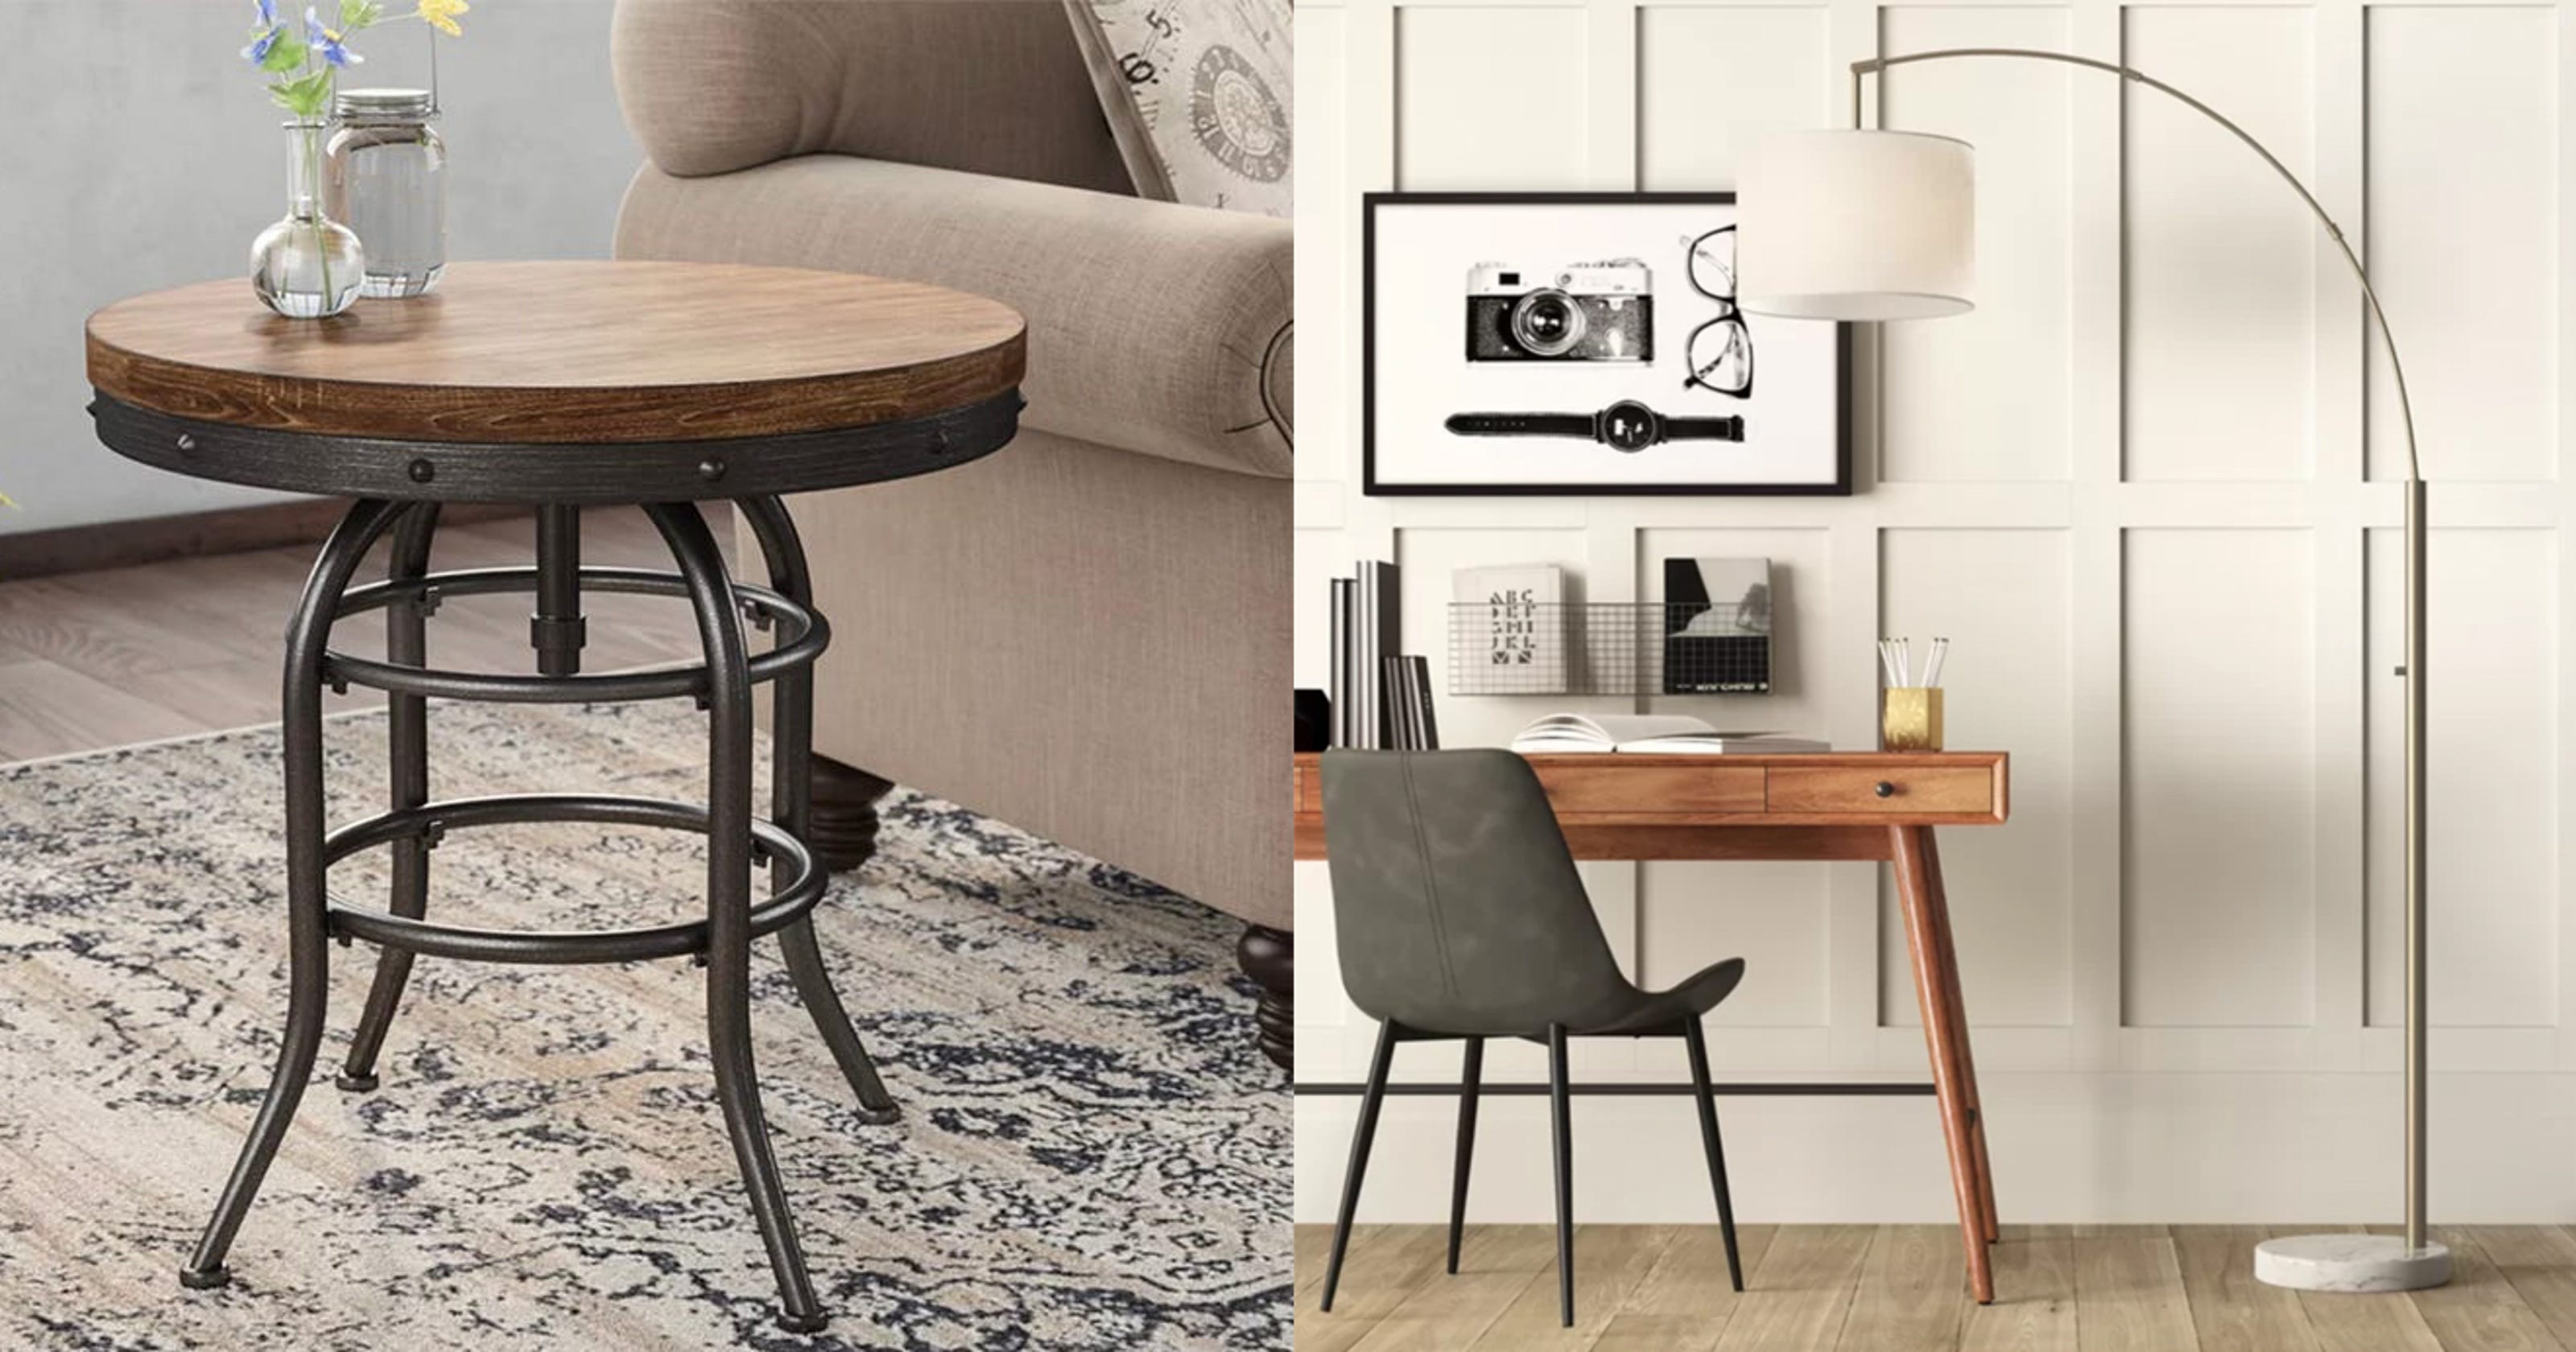 Wayfair October Clearance Sale: 16 popular home decor and furniture to